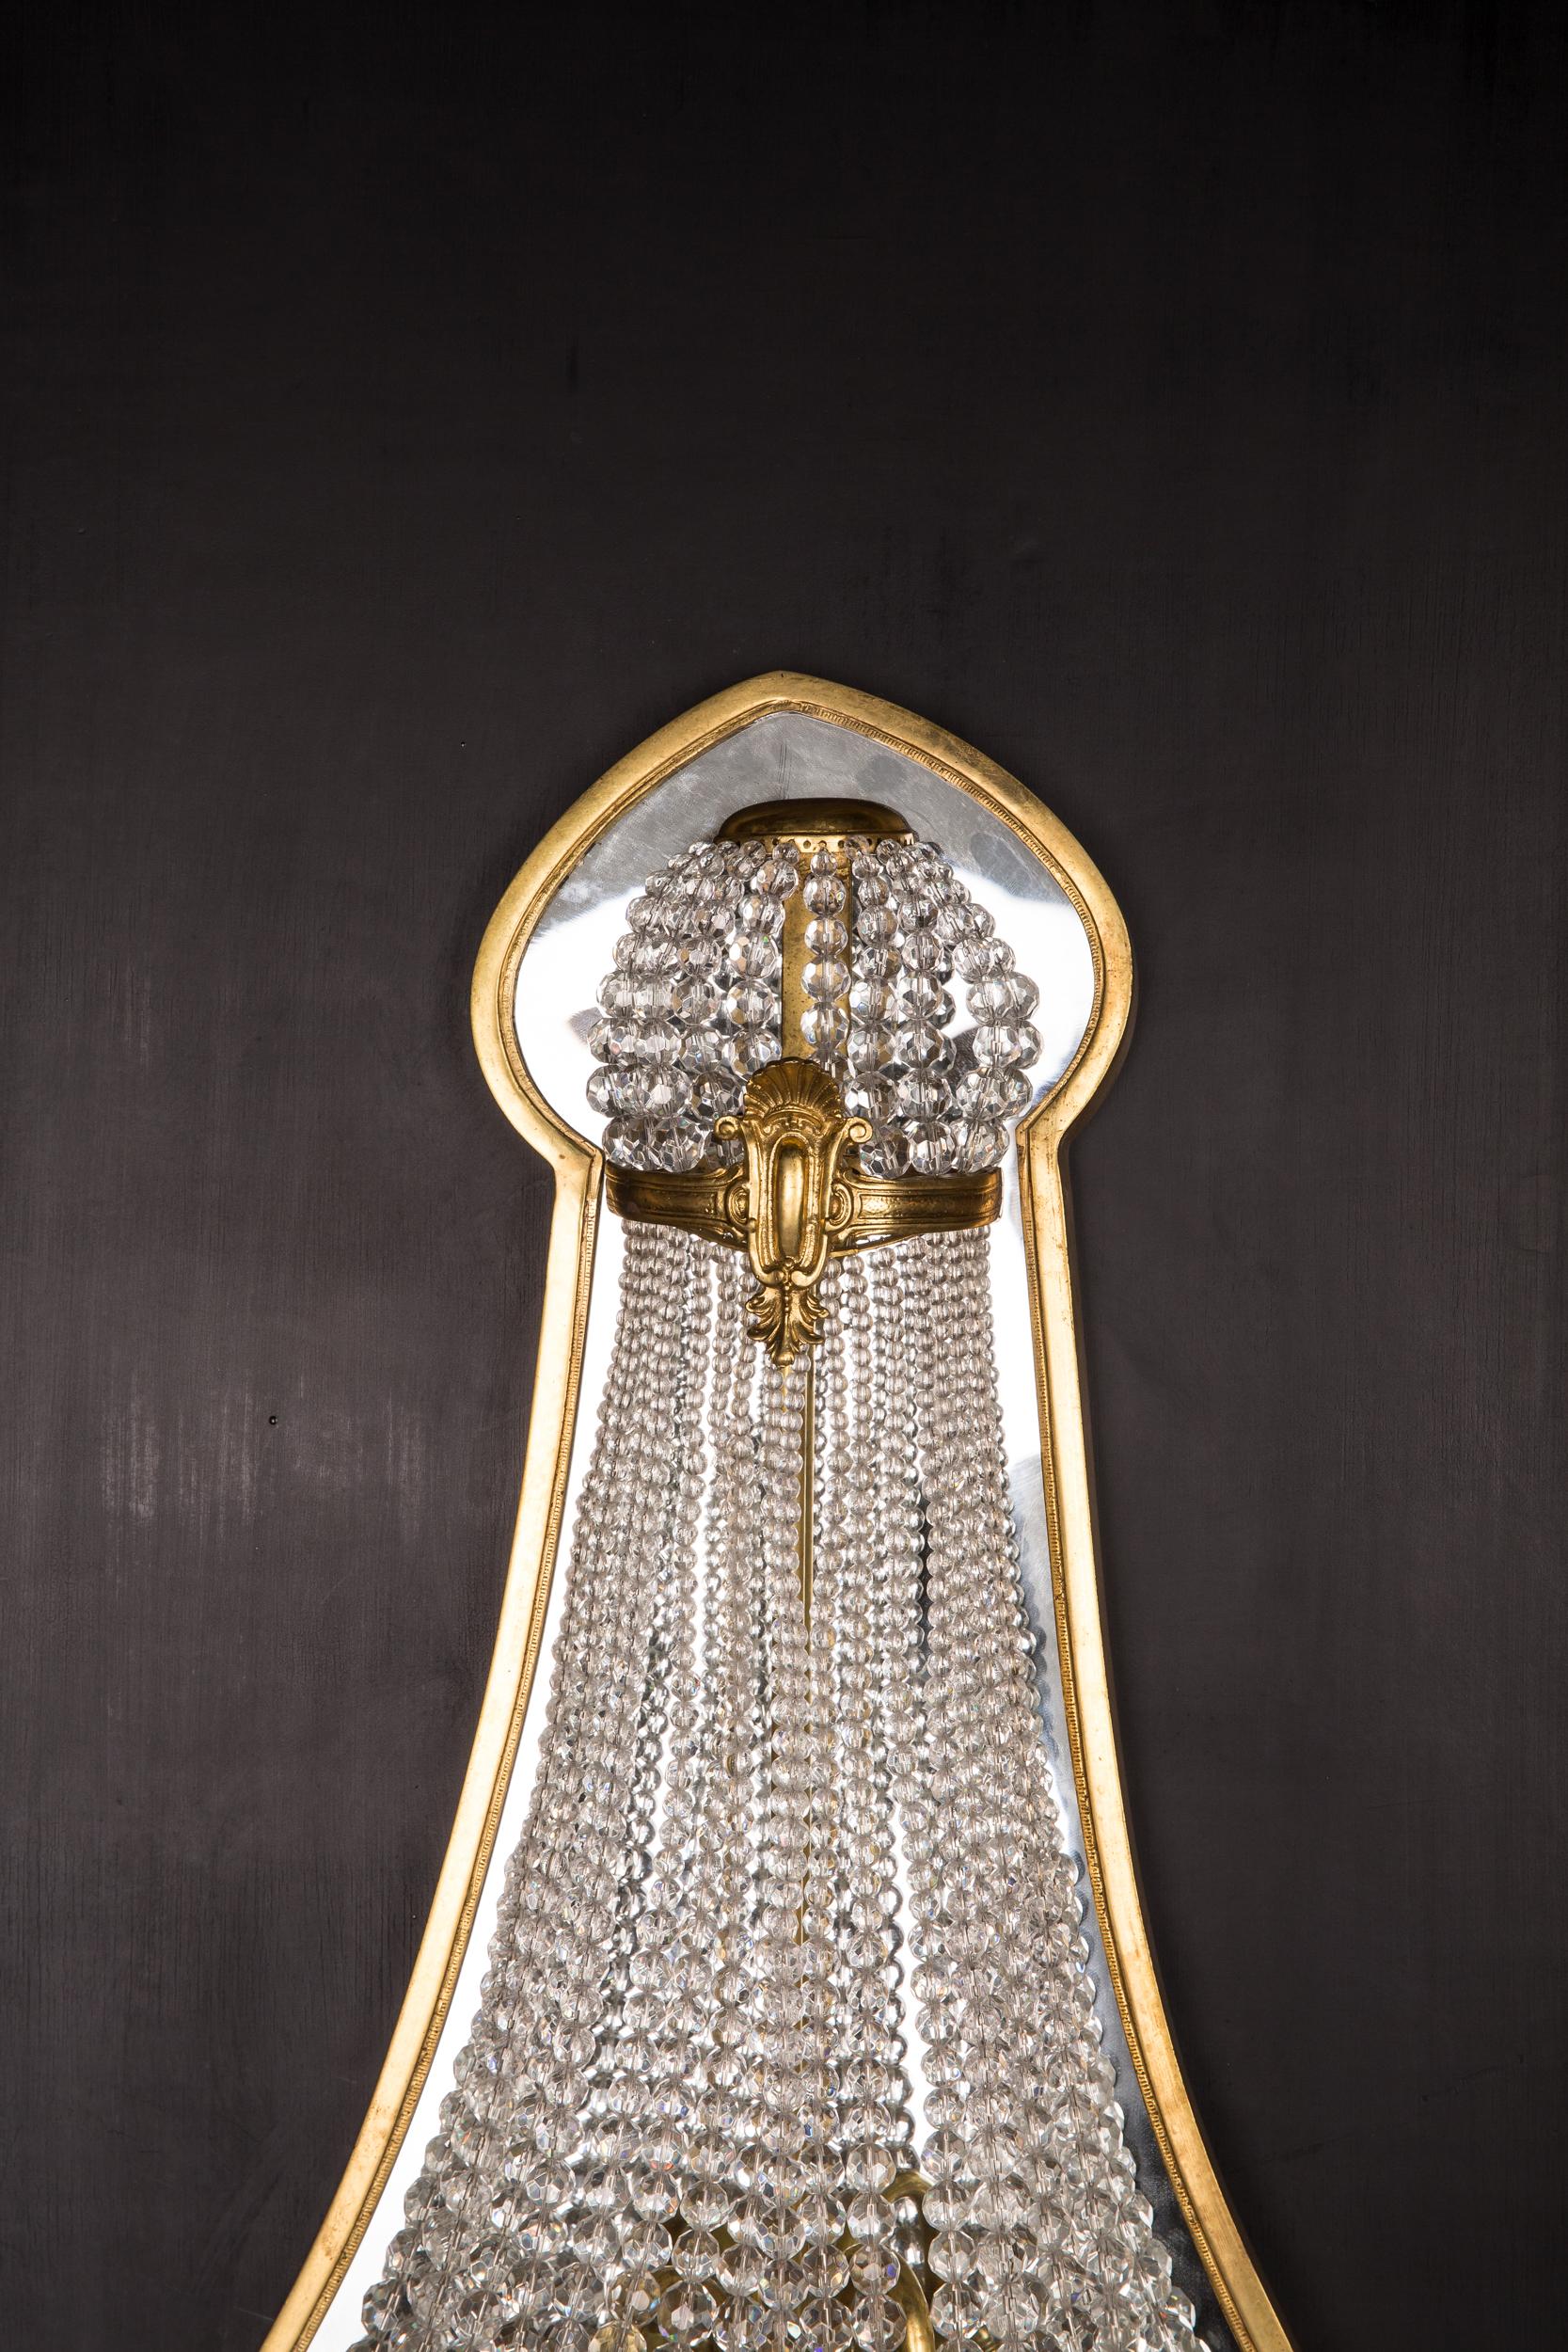 Bronzed Majestic bronze Crystal Sconces Chandelier Wall Applique in Louis Seize Style